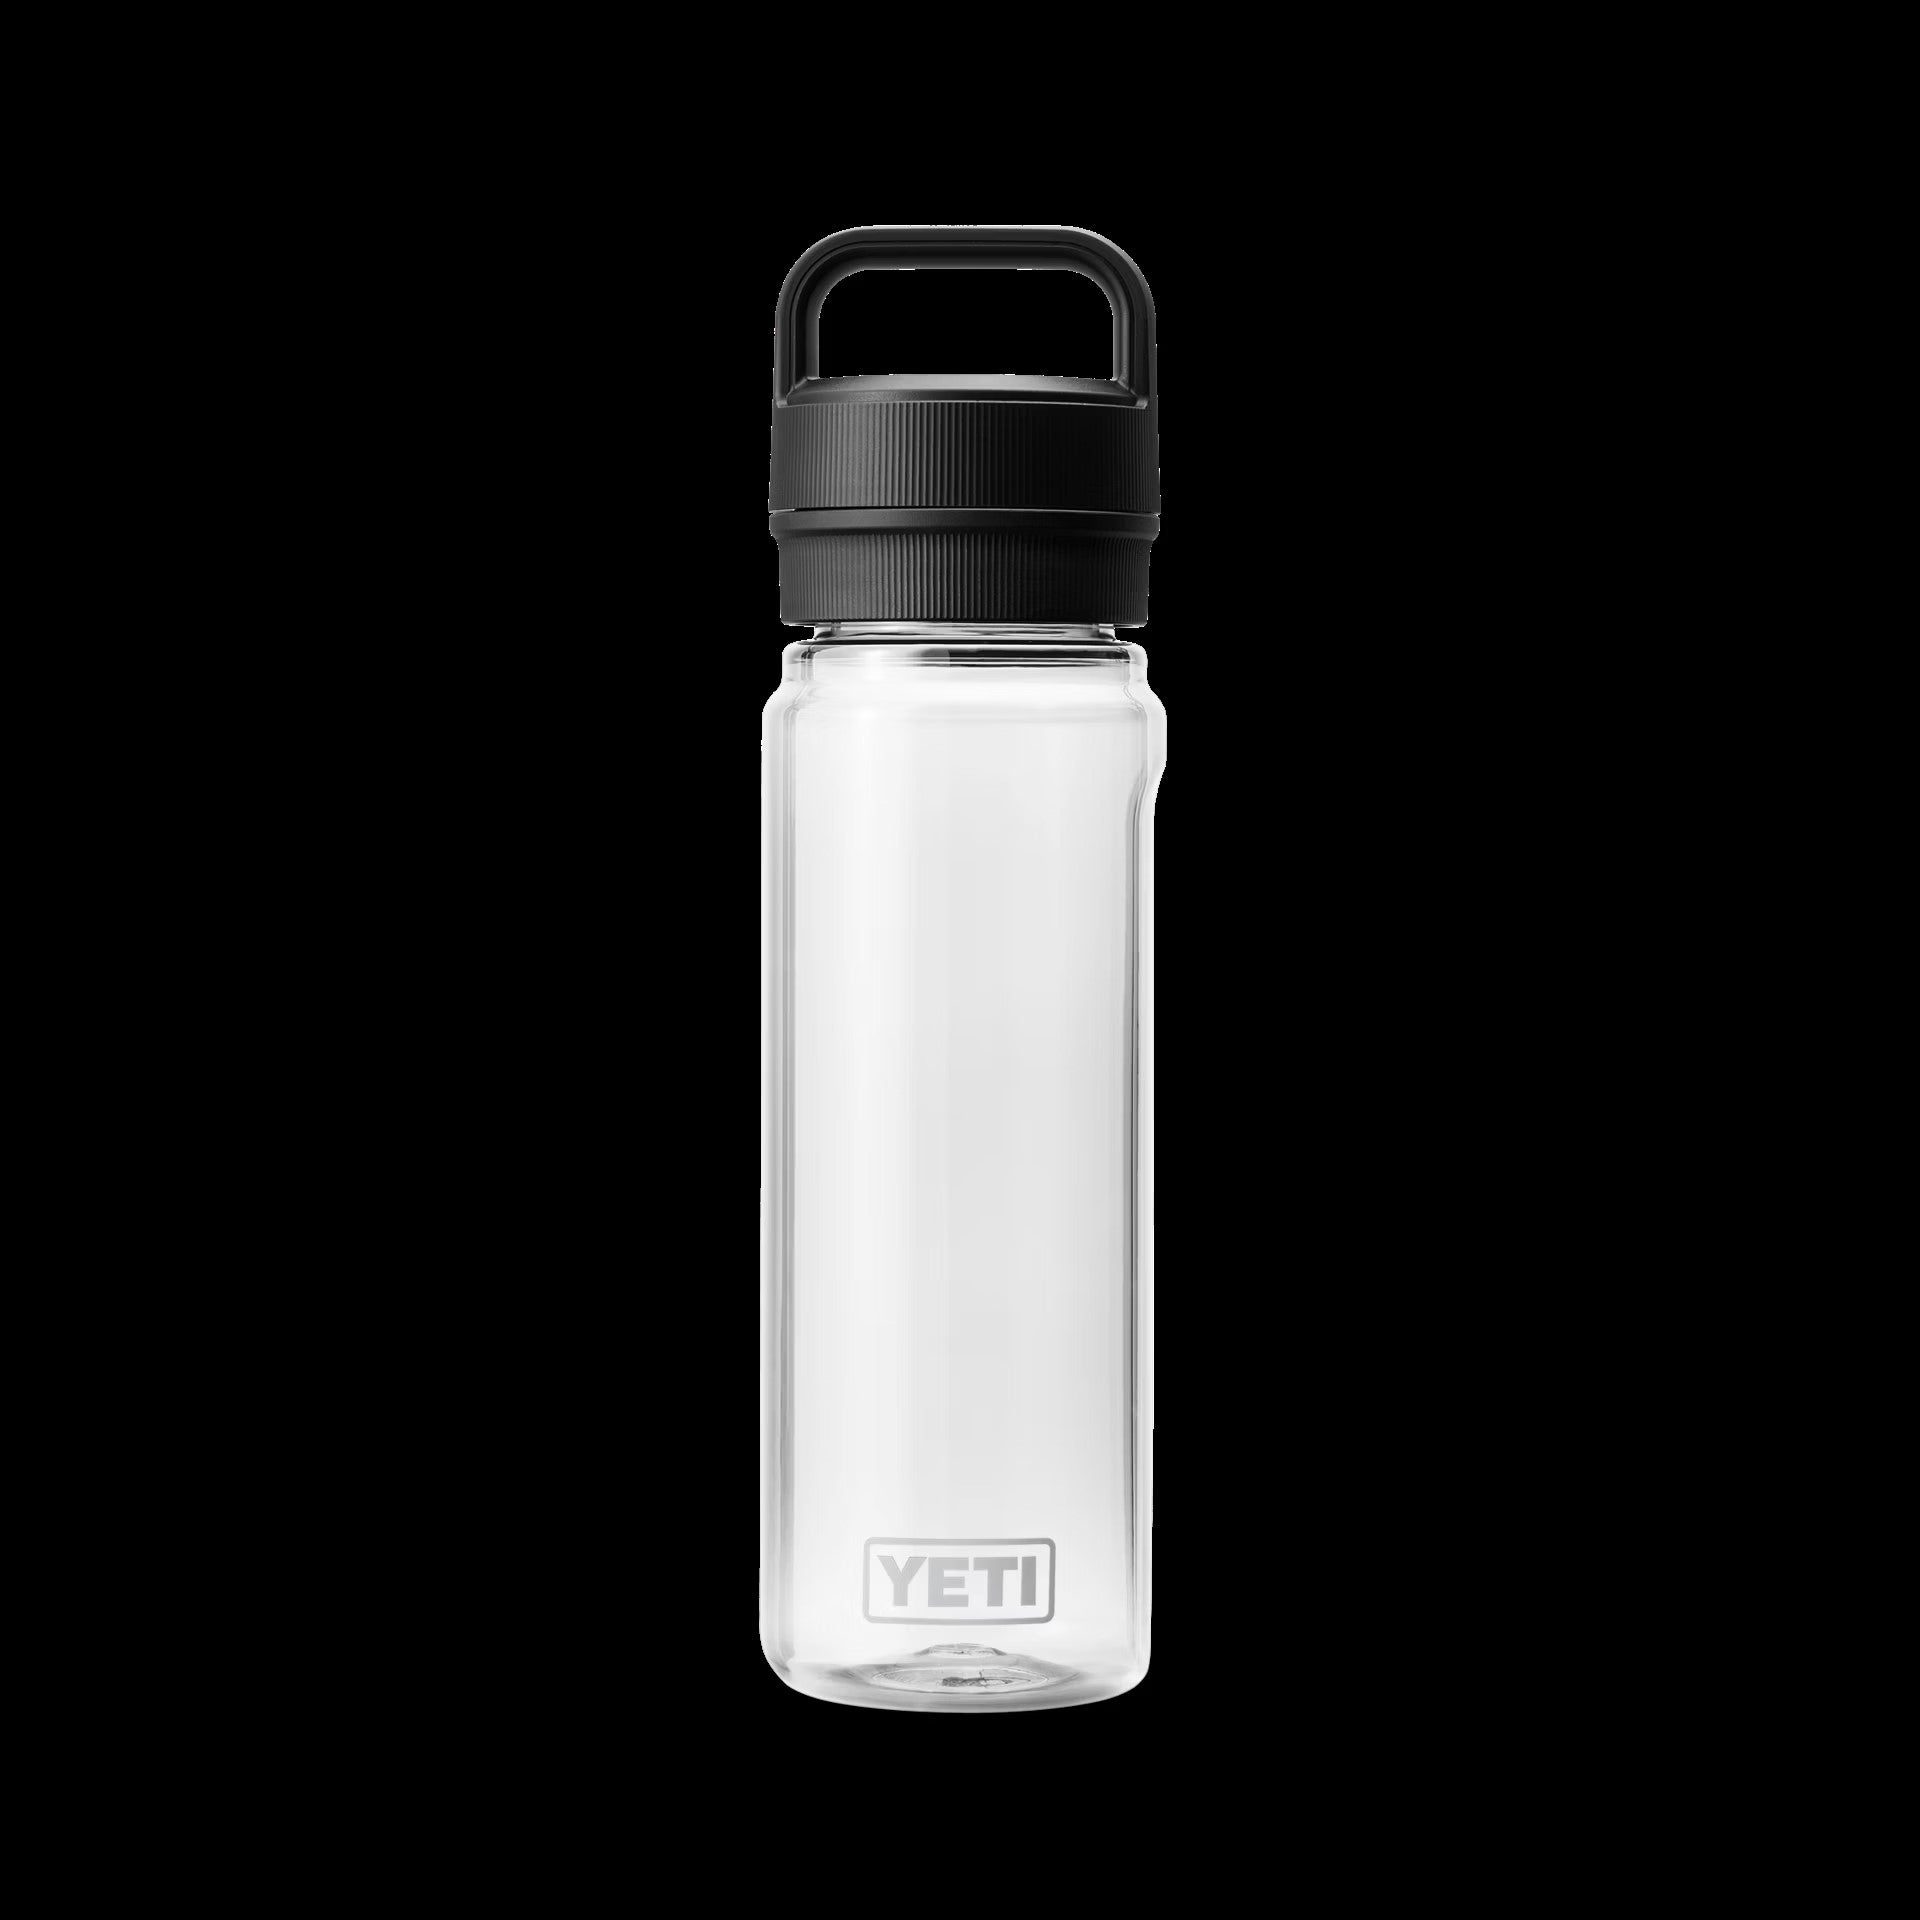 YETI Yonder 1L/34 oz Water Bottle with Yonder Chug Cap, Clear